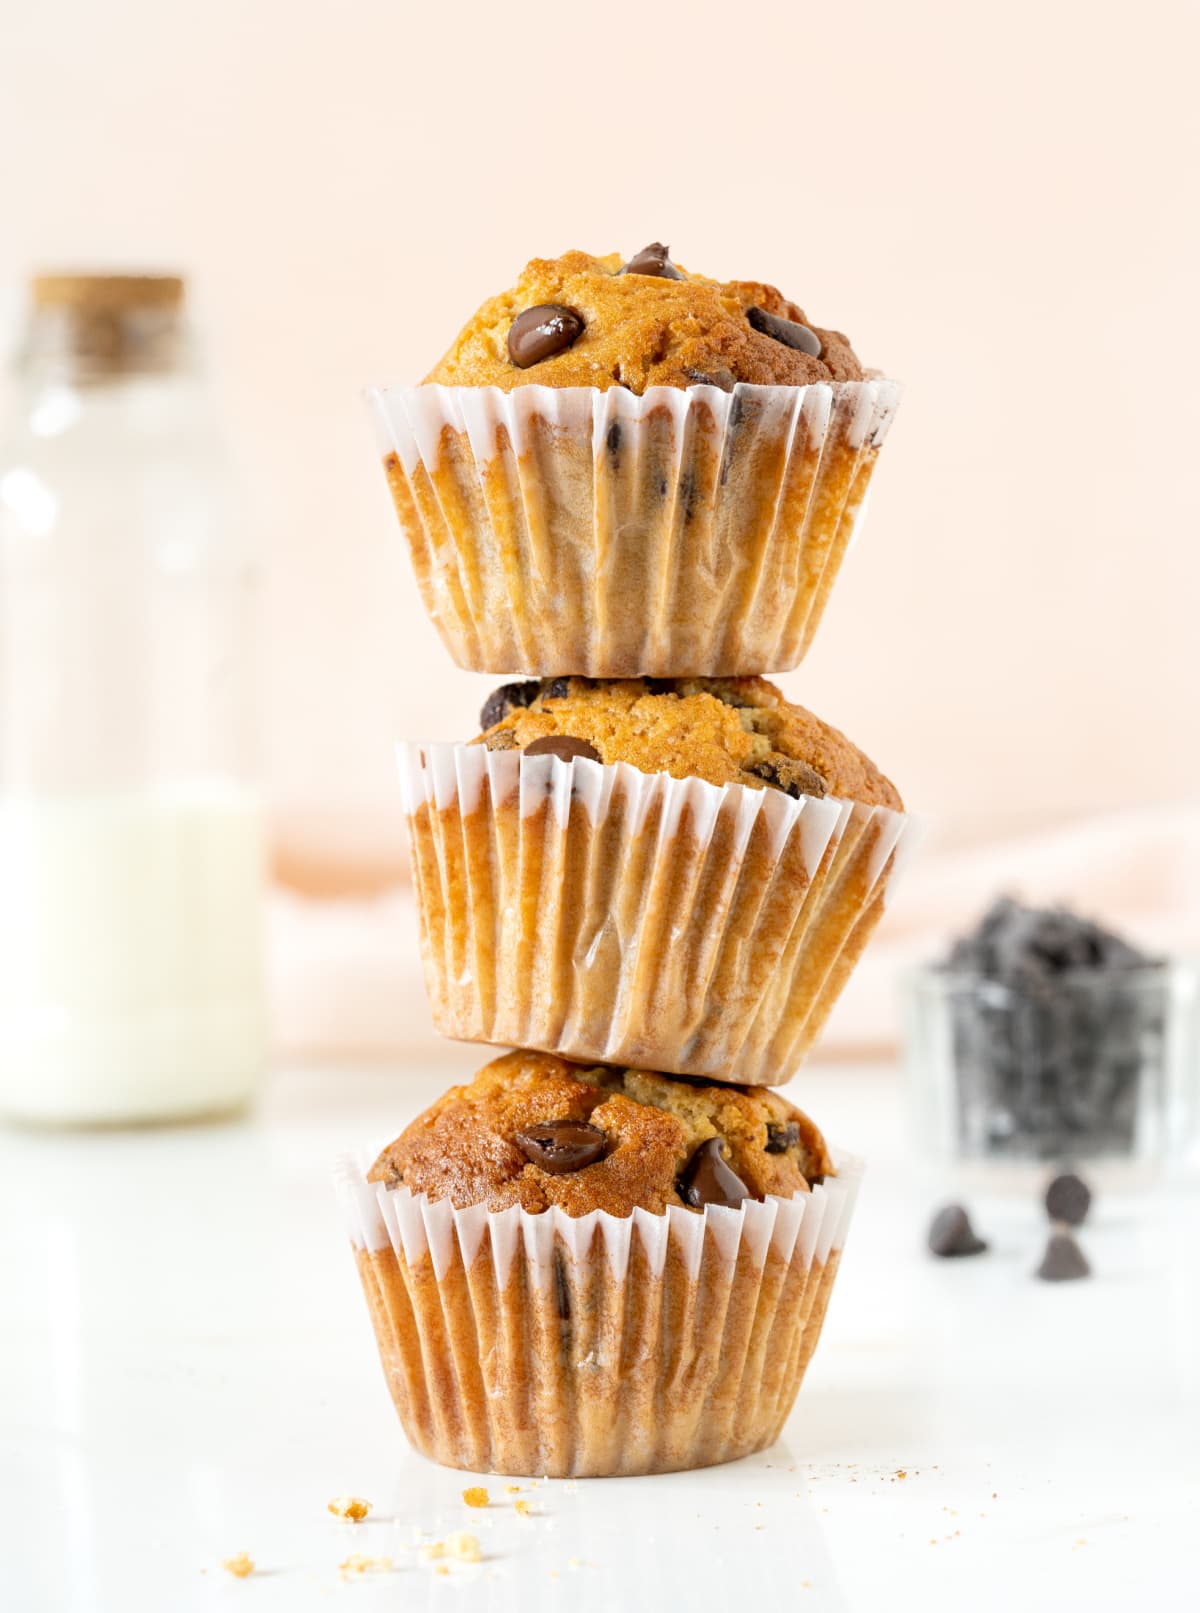 Stack of three chocolate chip muffins. White surface, pink background. Bowl of chips, milk bottle.